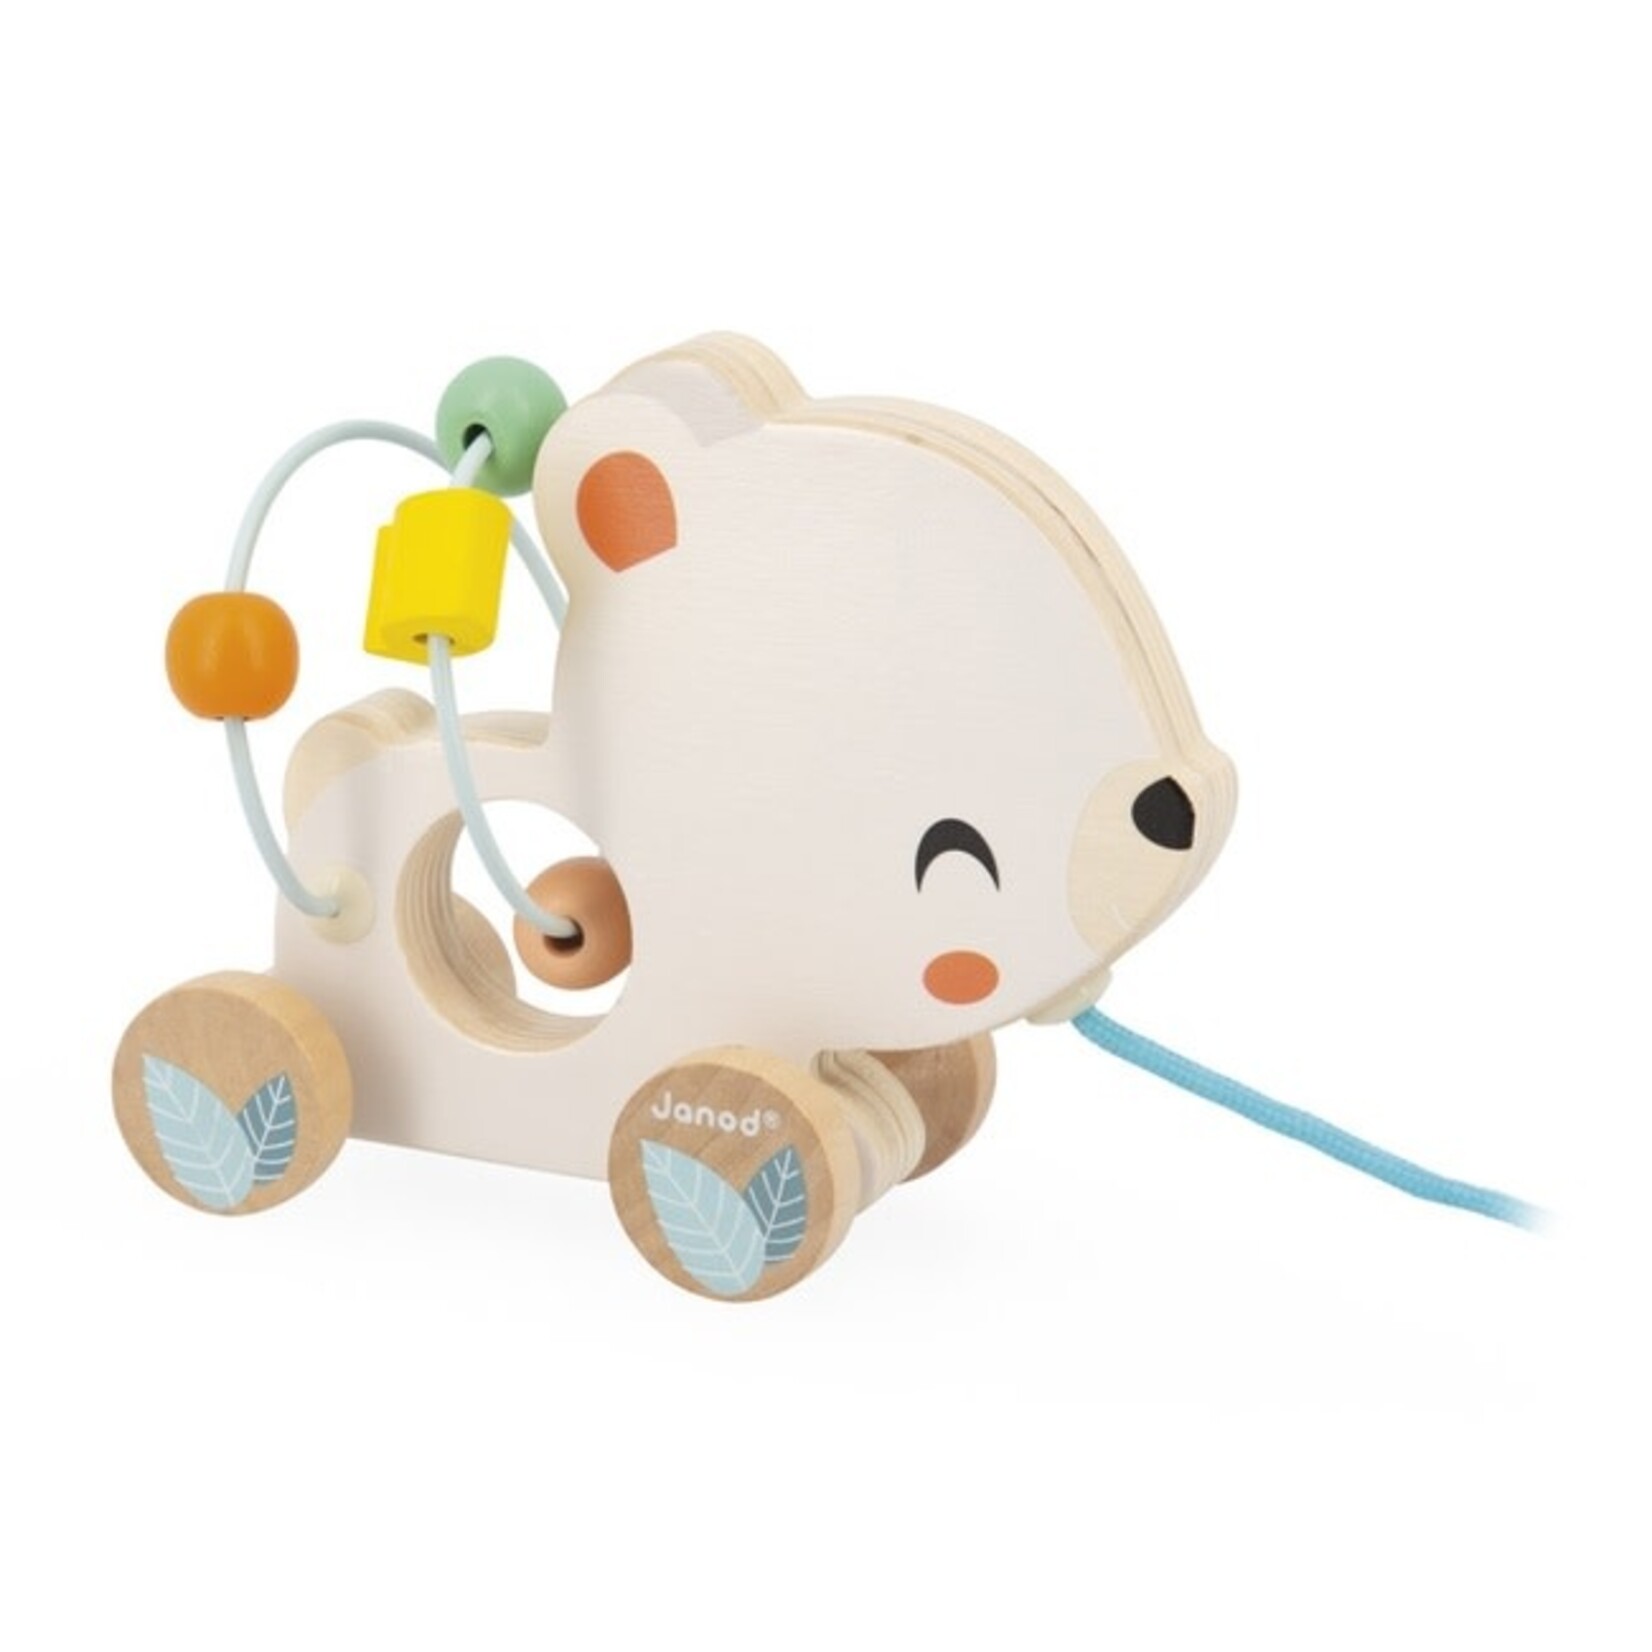 Janod JANOD - 'Baby Looping' Pull Along Toy